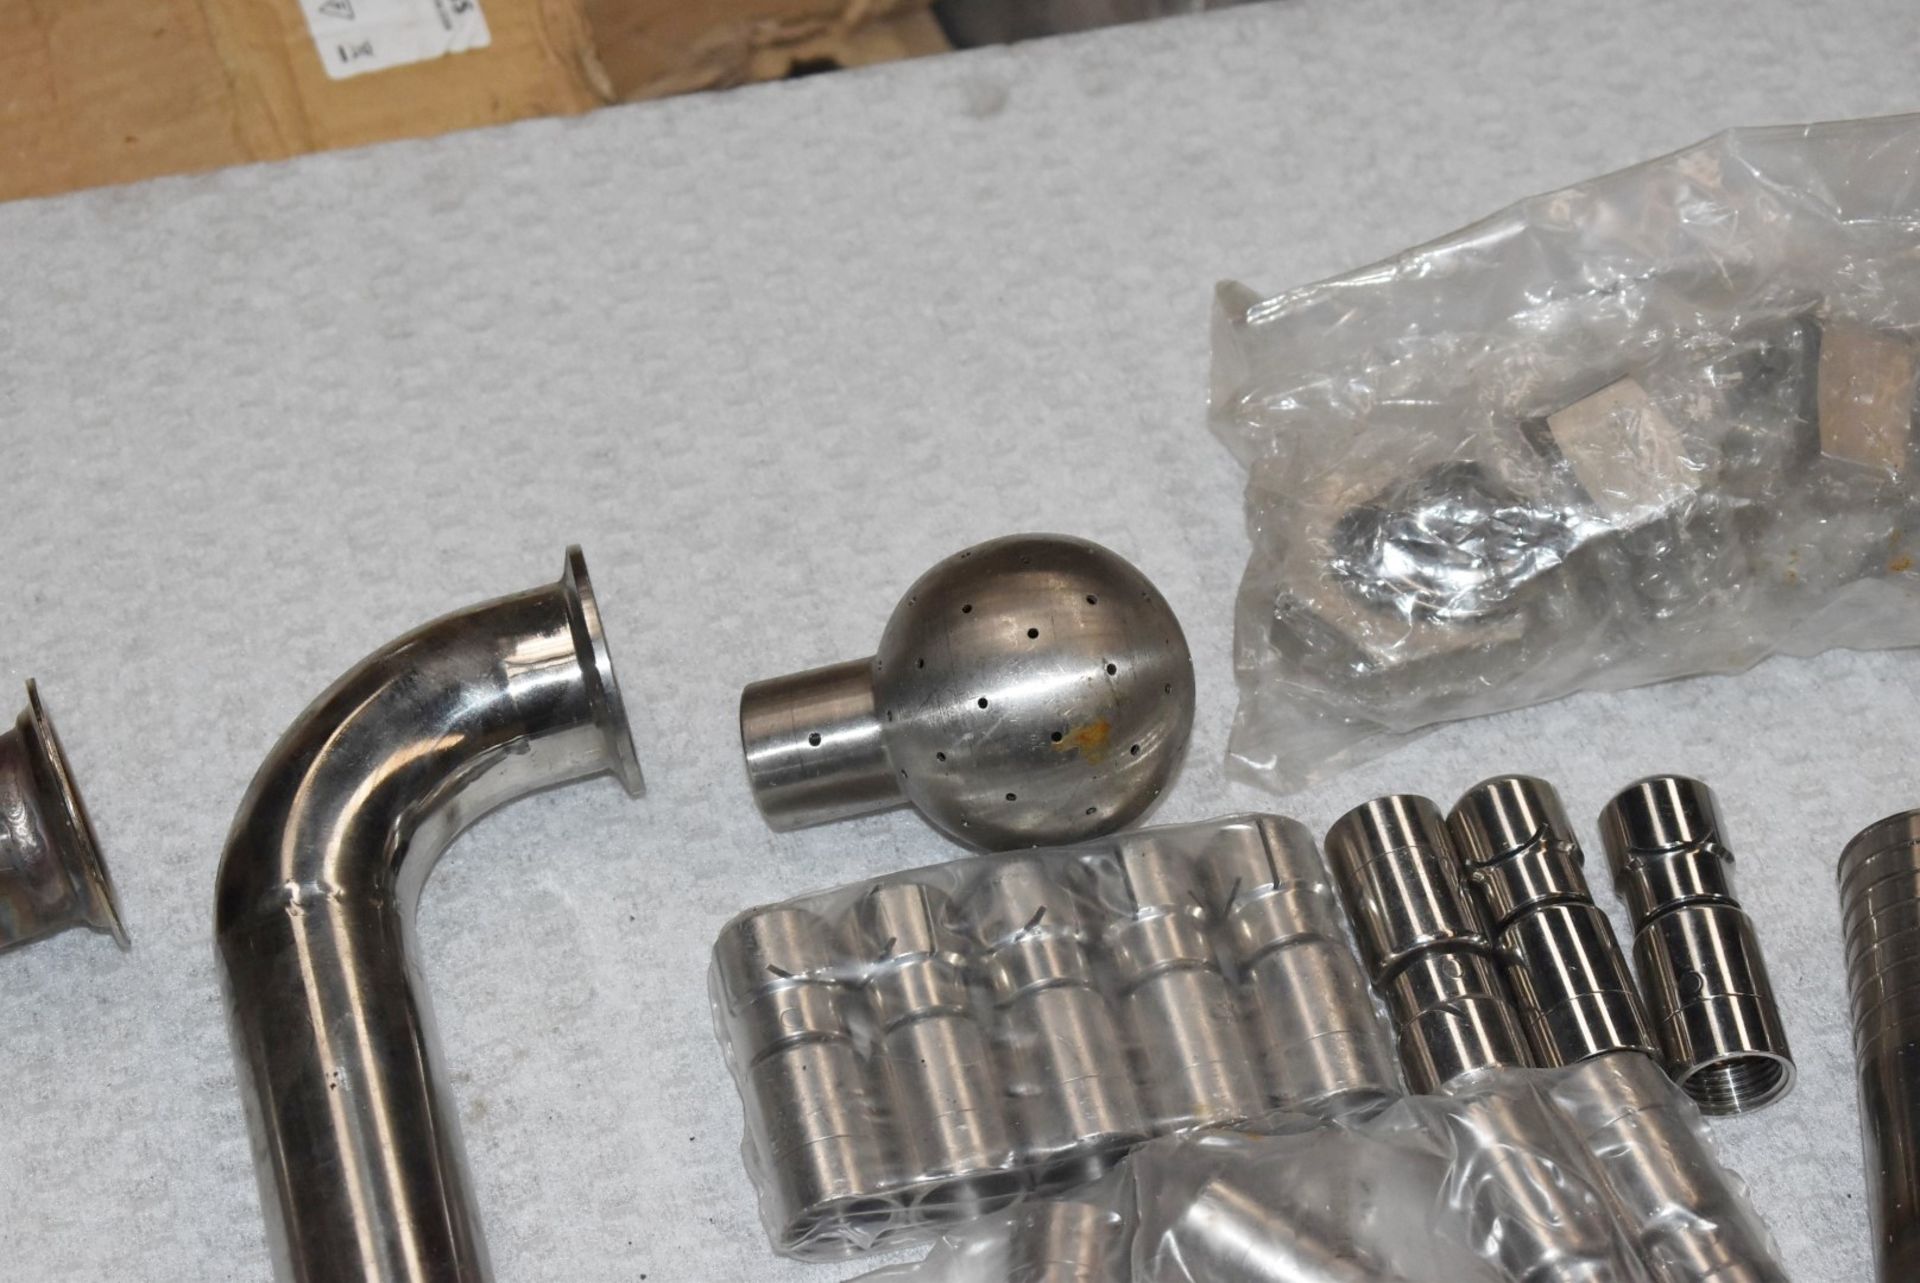 Assorted Job Lot of Stainless Steel Fittings For Brewery Equipment - Includes Approx 30 Pieces - - Image 15 of 17